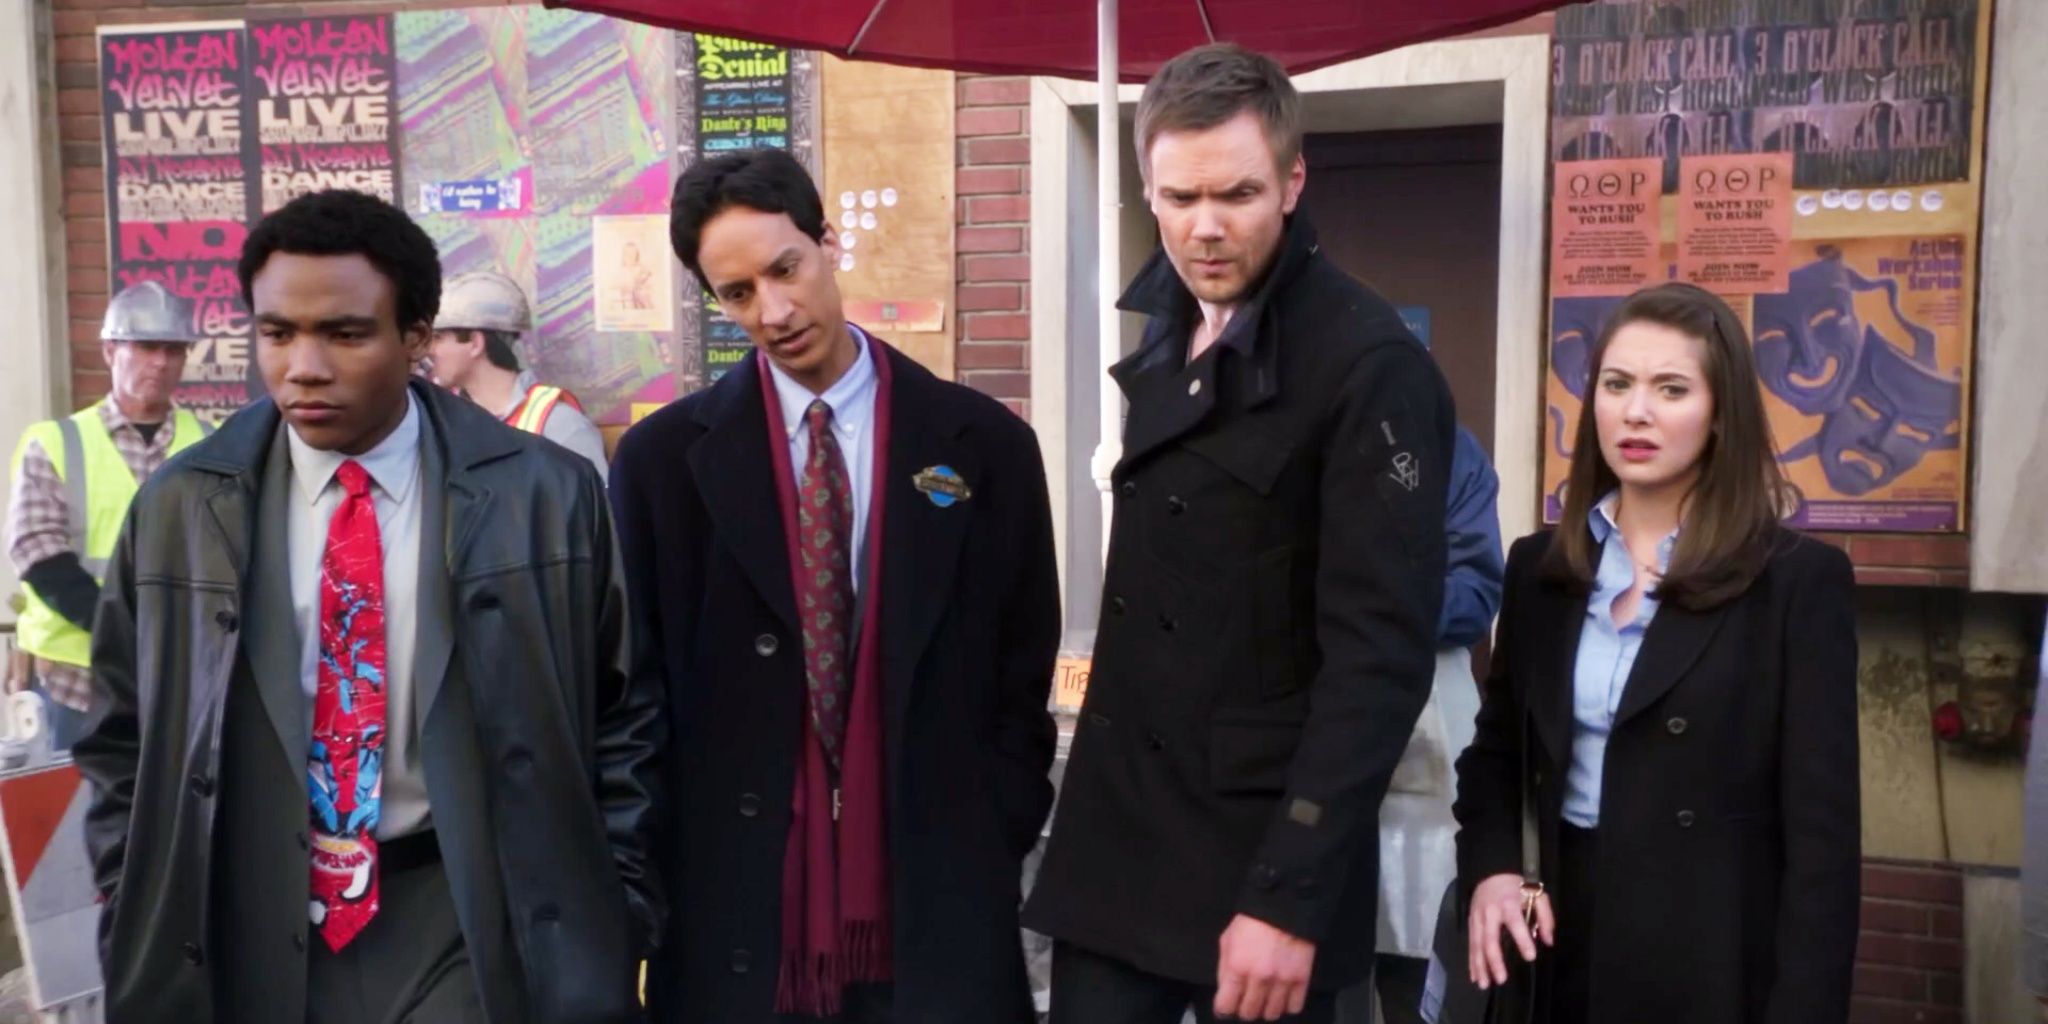 The study group parodies crime scene investigation shows in an episode of Community